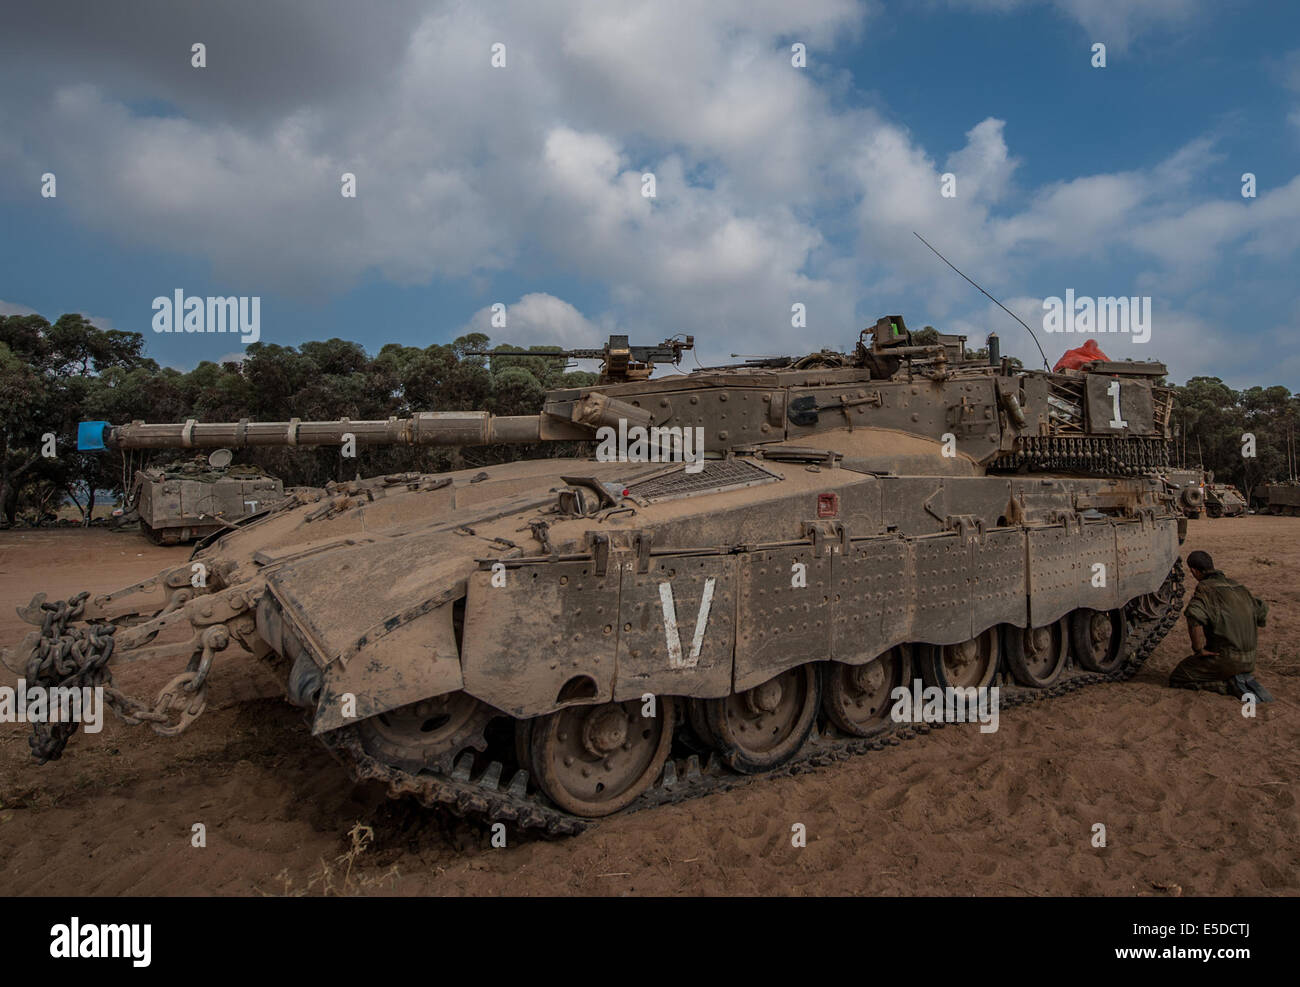 Gaza Border. 28th July, 2014. An Israeli soldier checks the caterpillar track of a Merkava tank at an army deployment area in southern Israel near the border with the Gaza Strip, on July 28, 2014. Israel's top political and defense leadership on Monday night defied international calls for a cease-fire in the Gaza Strip, determining to continue the massive offensive there until the risk posed by Gaza militant groups is "neutralized." Credit:  Li Rui/Xinhua/Alamy Live News Stock Photo